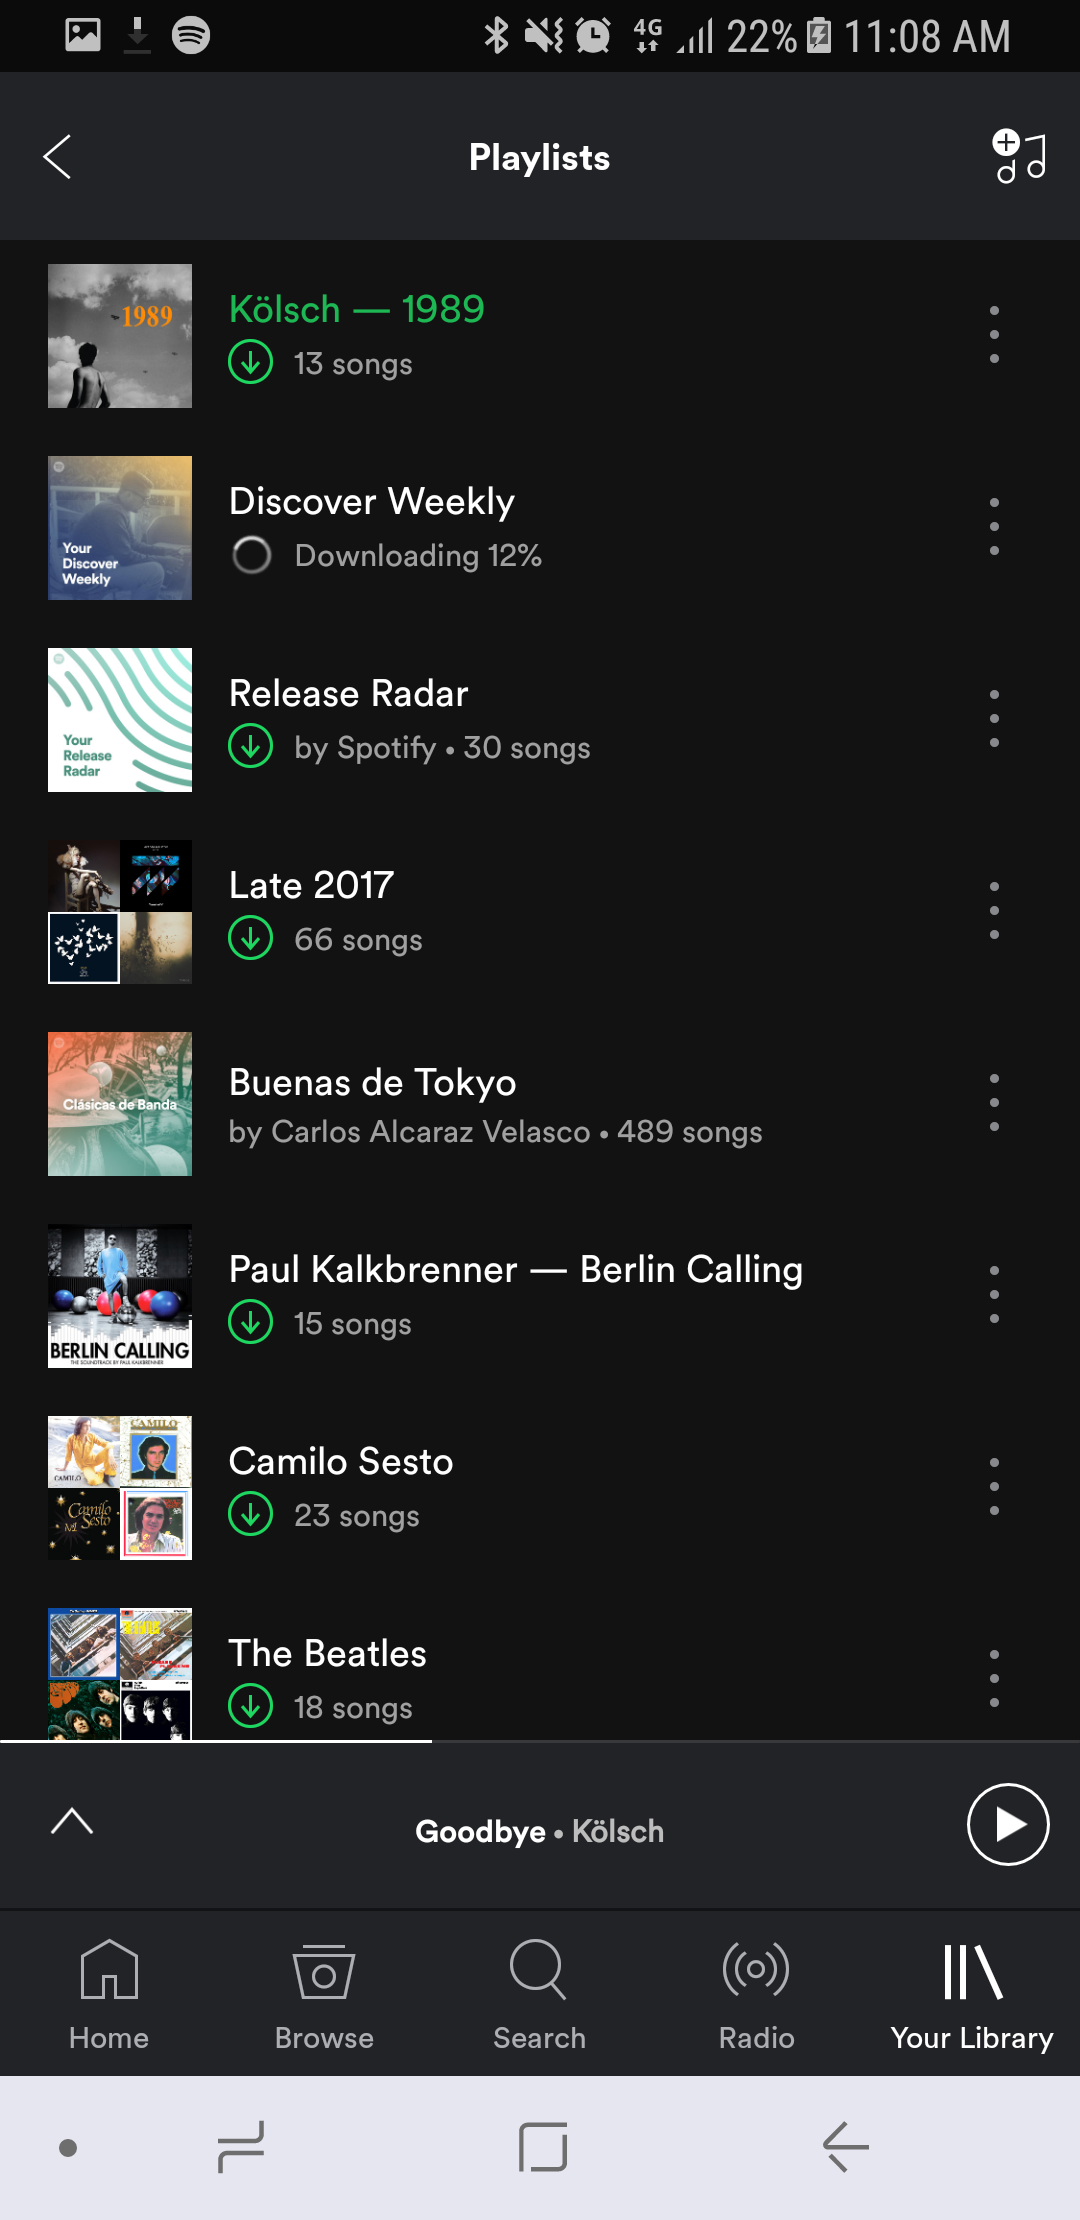 Hot to turn on auto download for spotify playlists